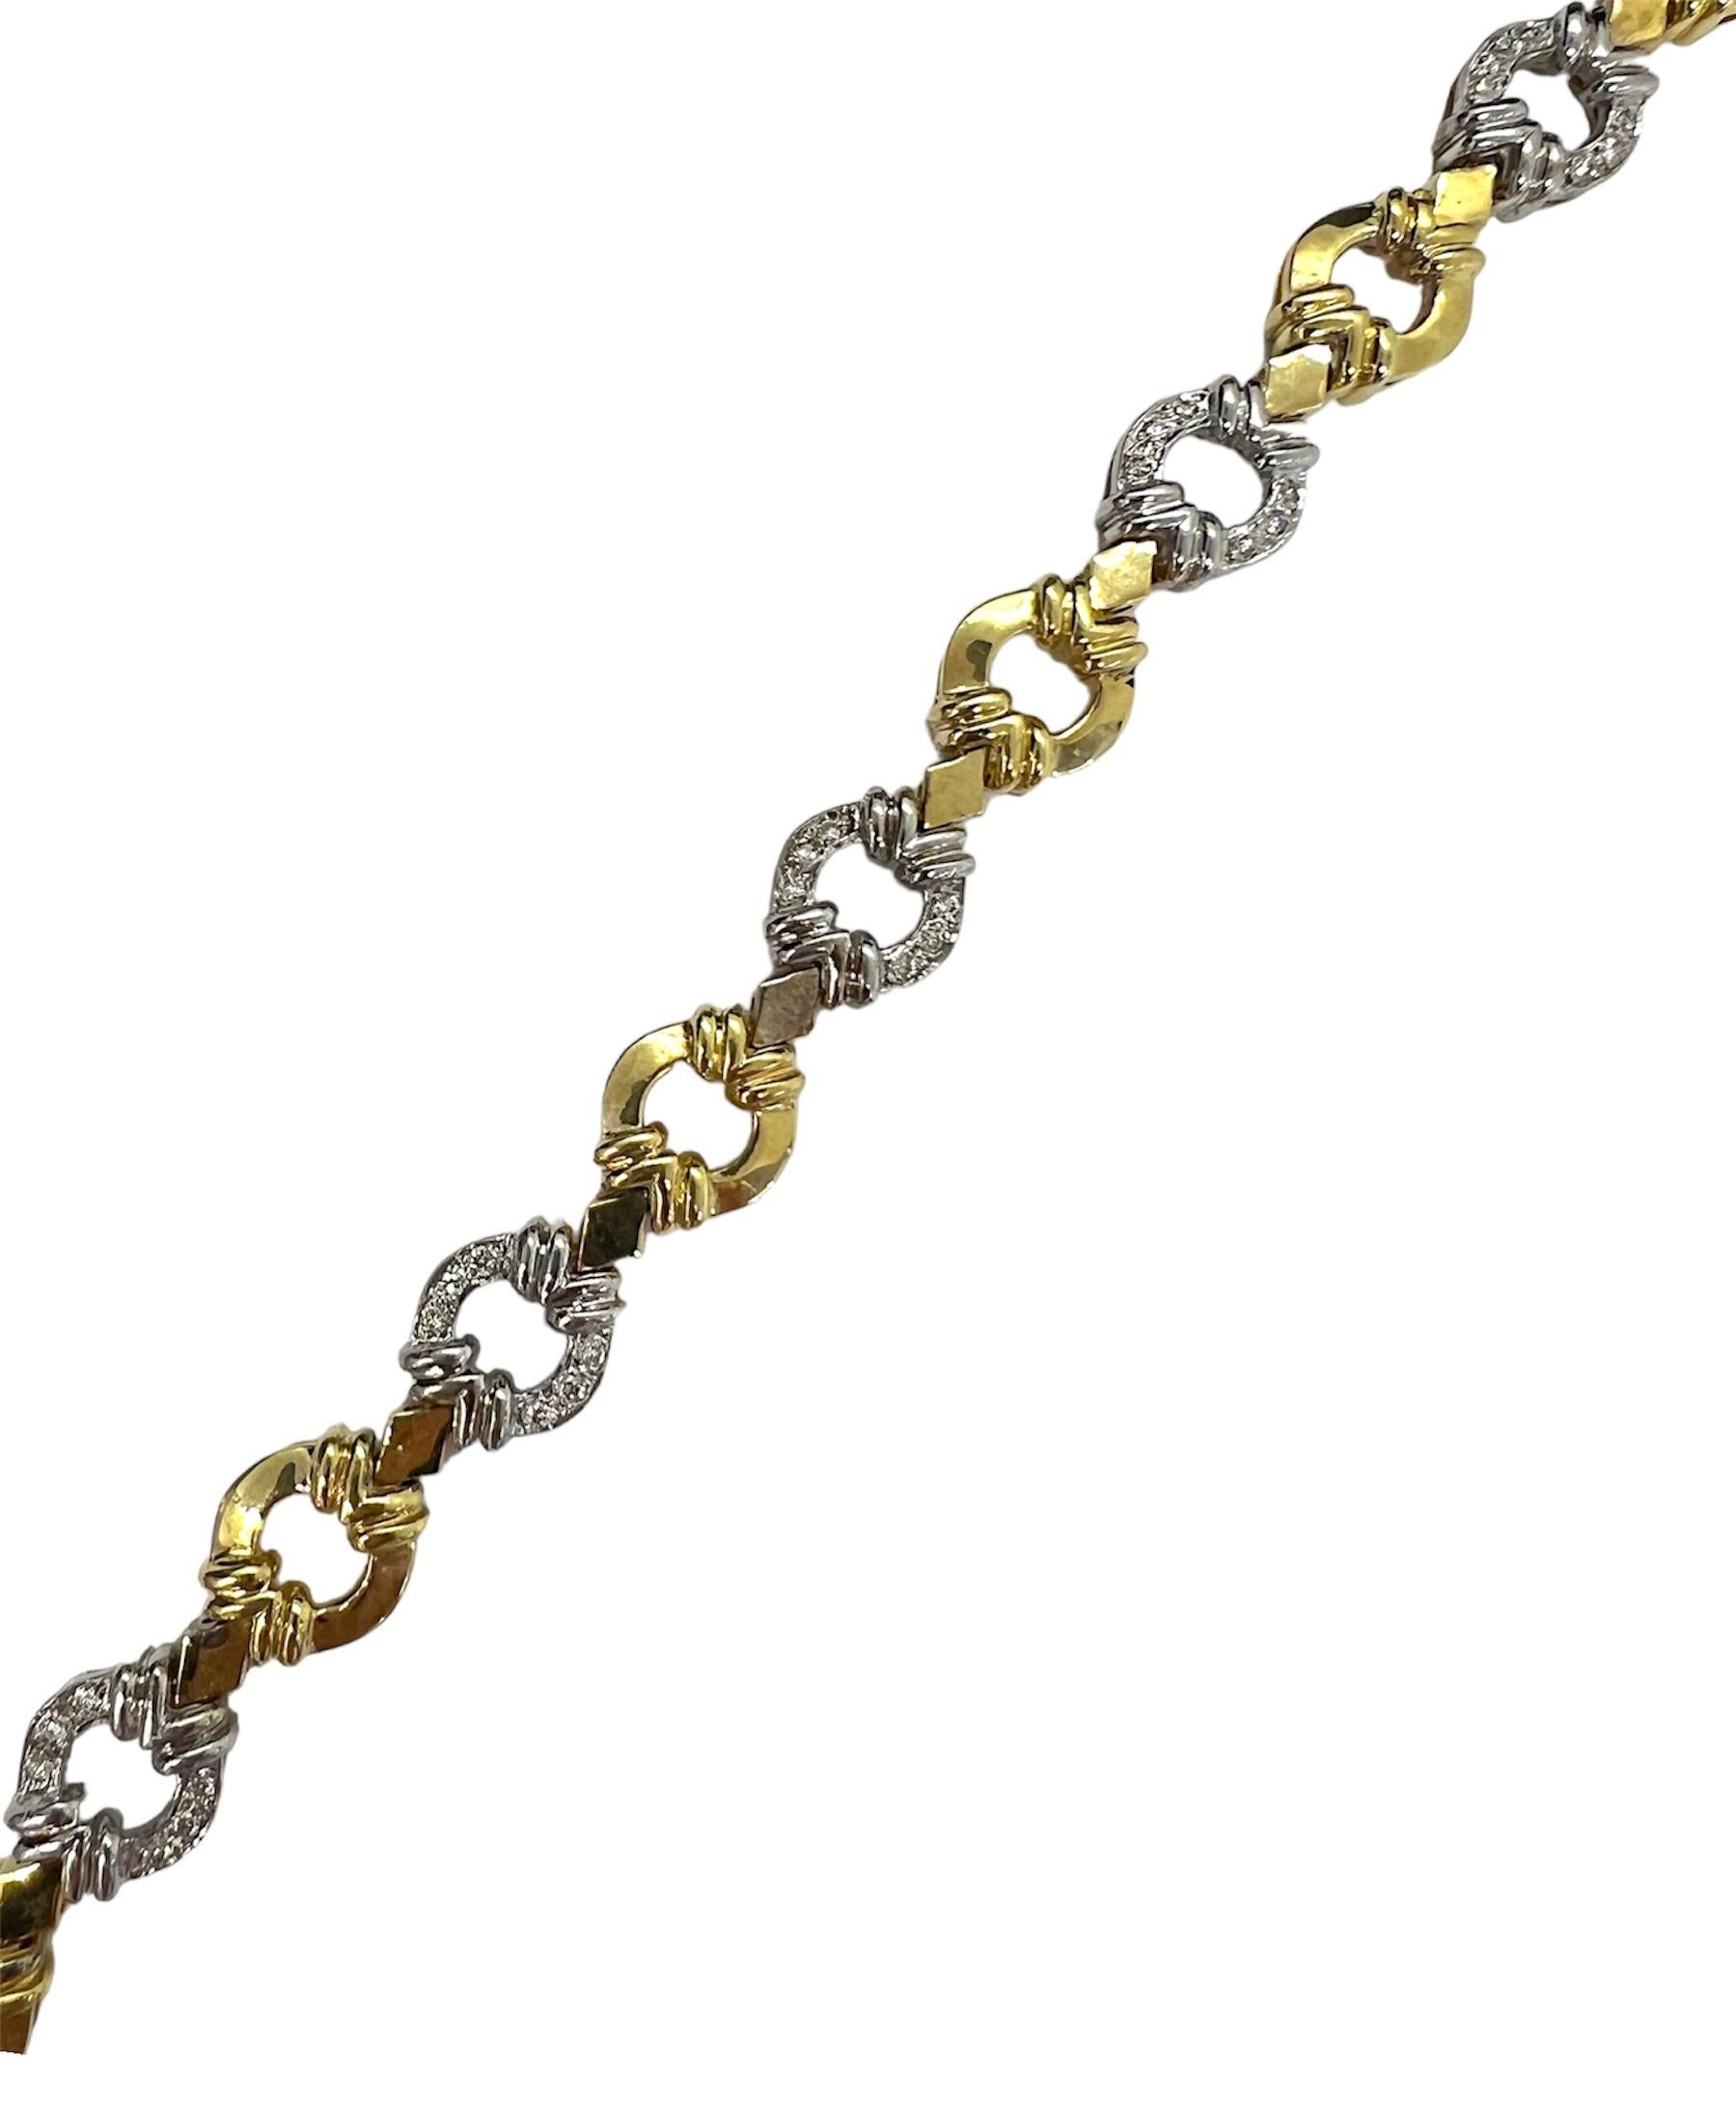 Yellow gold and white gold bracelet with diamonds.

Sophia D by Joseph Dardashti LTD has been known worldwide for 35 years and are inspired by classic Art Deco design that merges with modern manufacturing techniques.